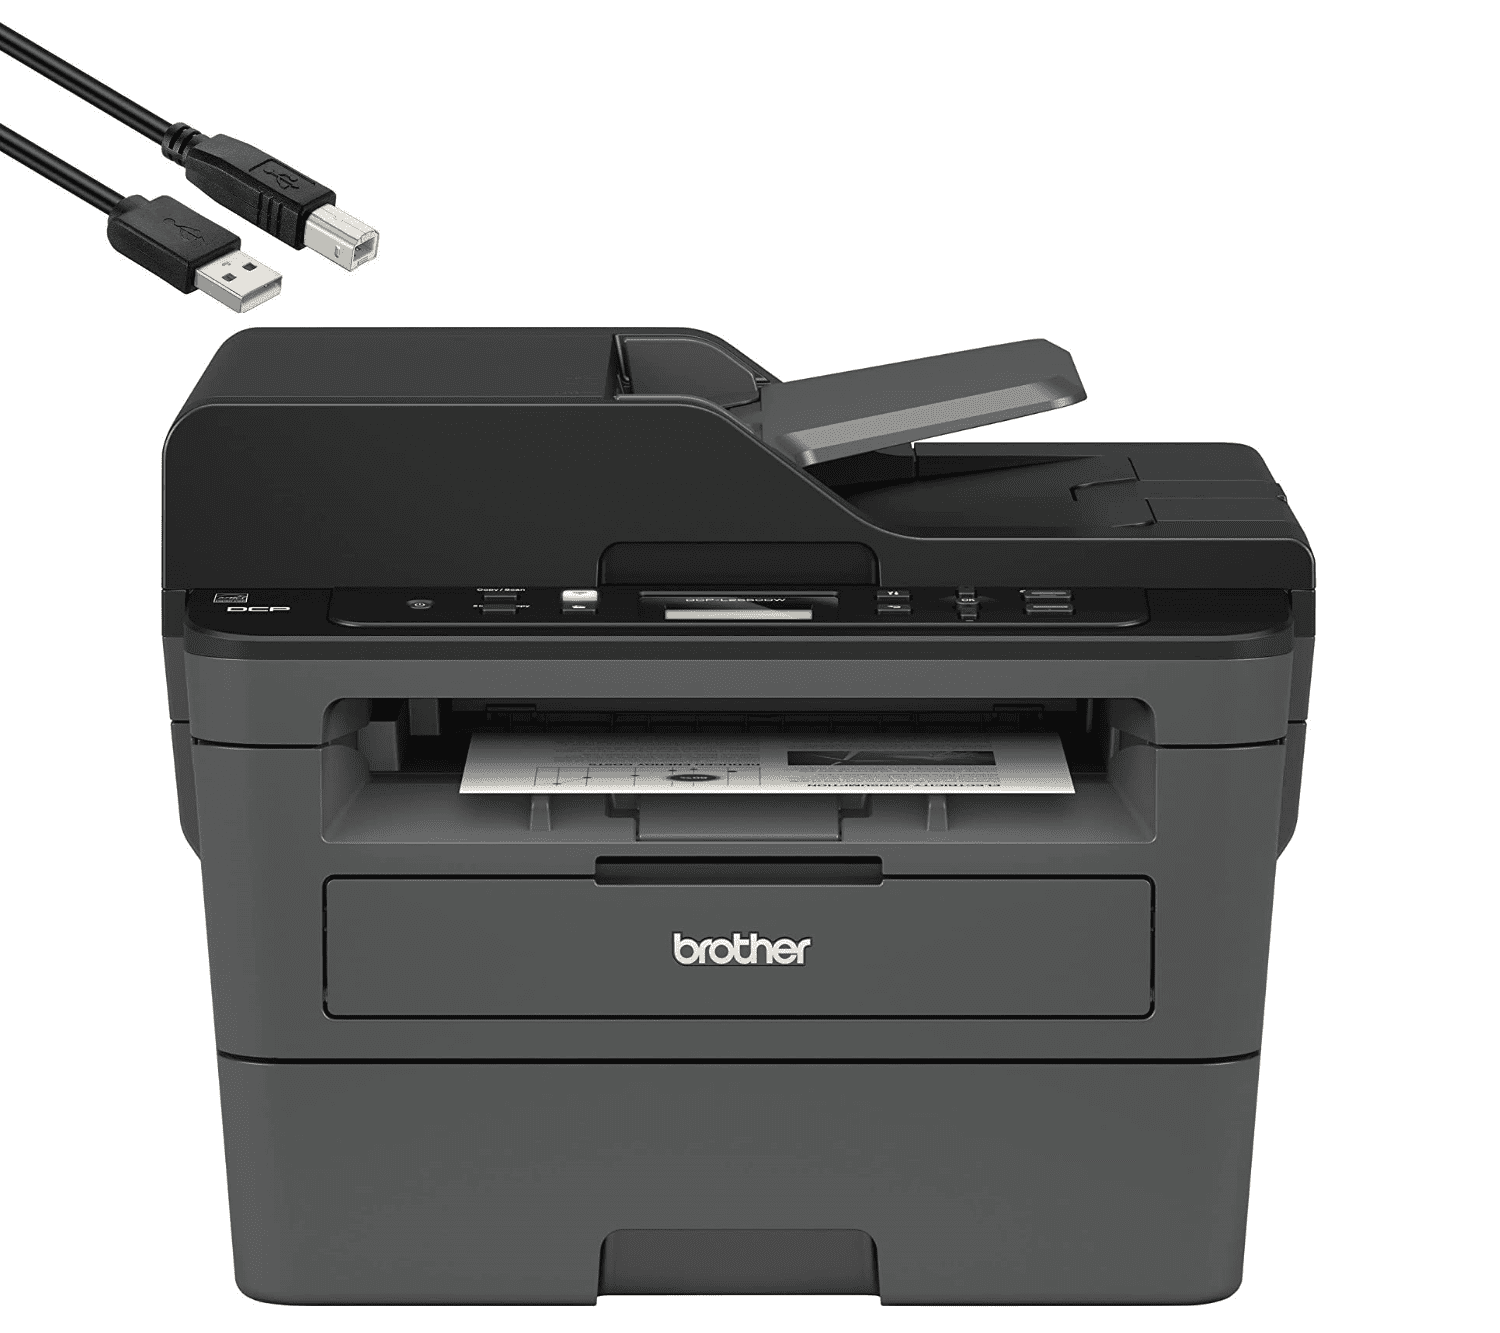 Brother DCP-L2550DW All-in-One Wireless Printer - Print Scan Copy - 2400 x 600 dpi, 36 ppm, 128MB Memory, 250-Sheet, 50-Sheet ADF, Duplex Printing, 4 Feet USB Printer Cable -